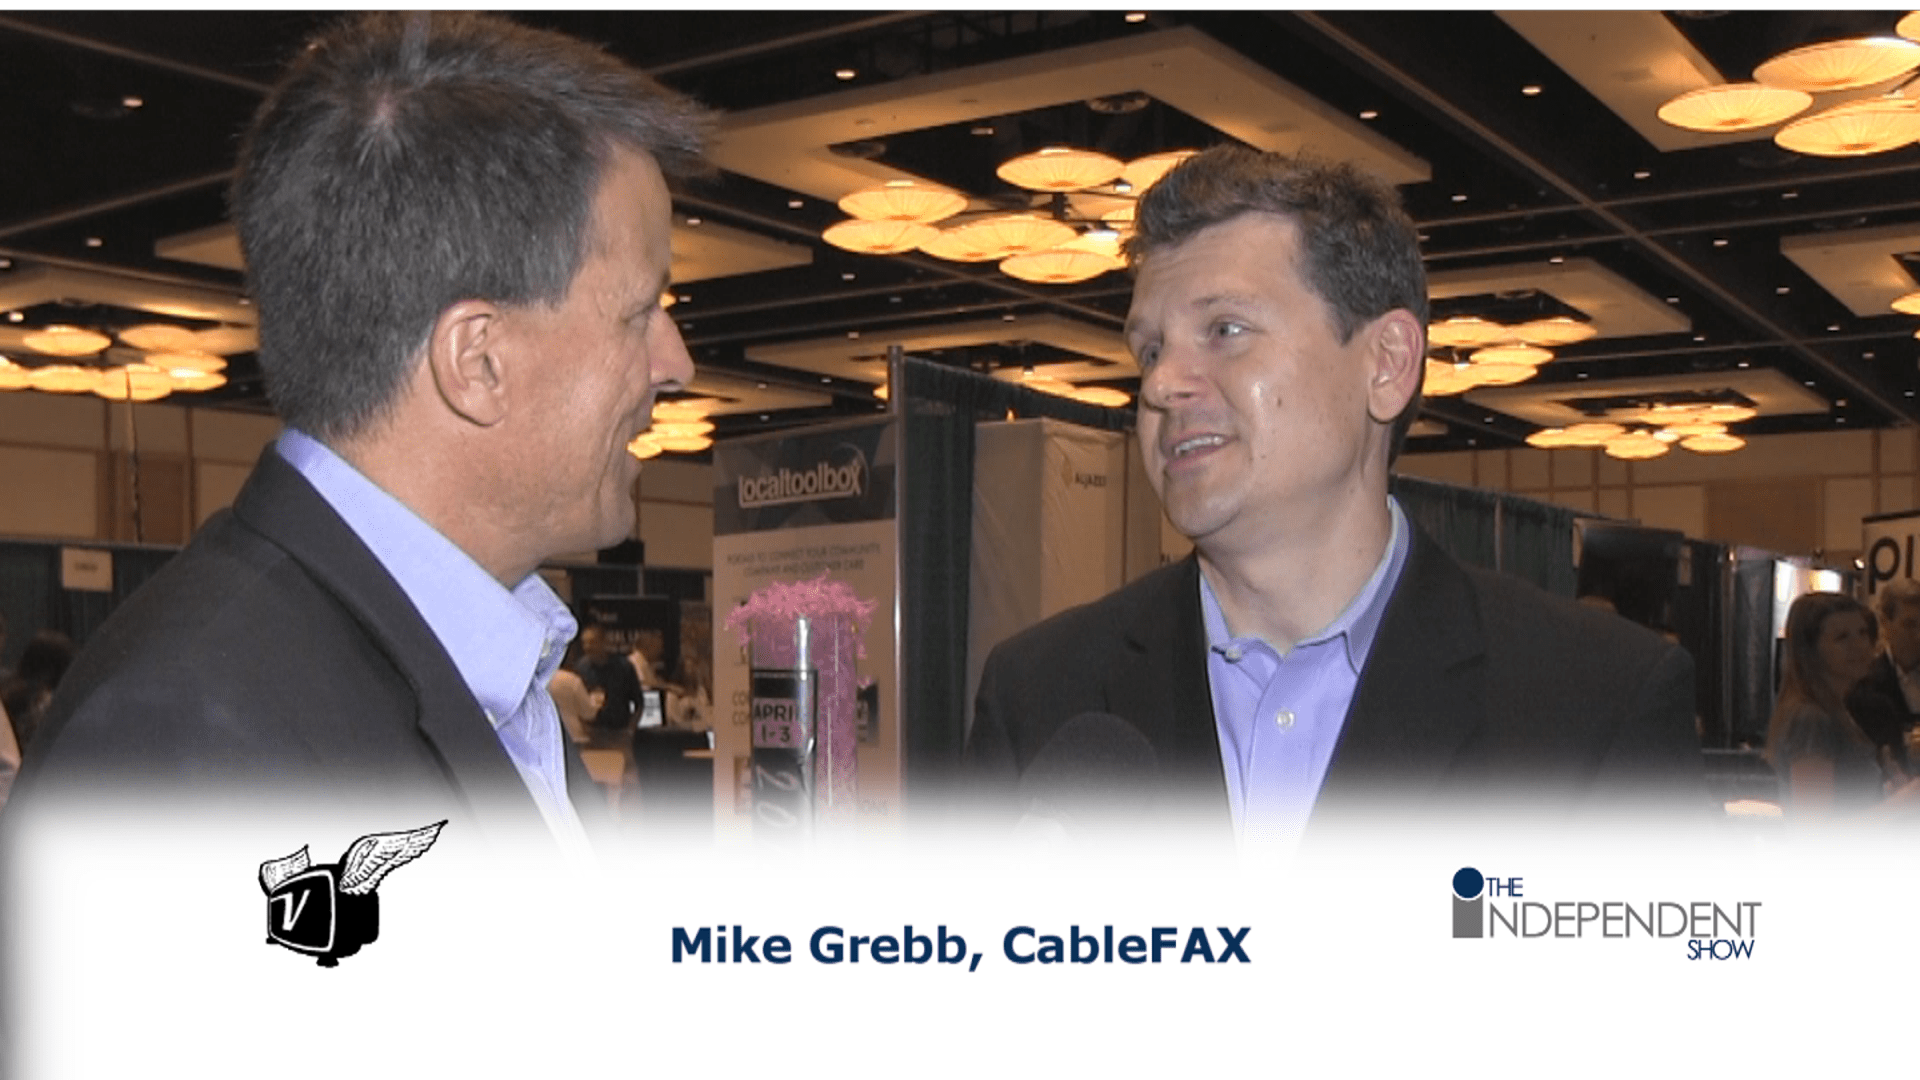 Ken Pyle interviews Mike Grebb of CableFAX at The Independent Show